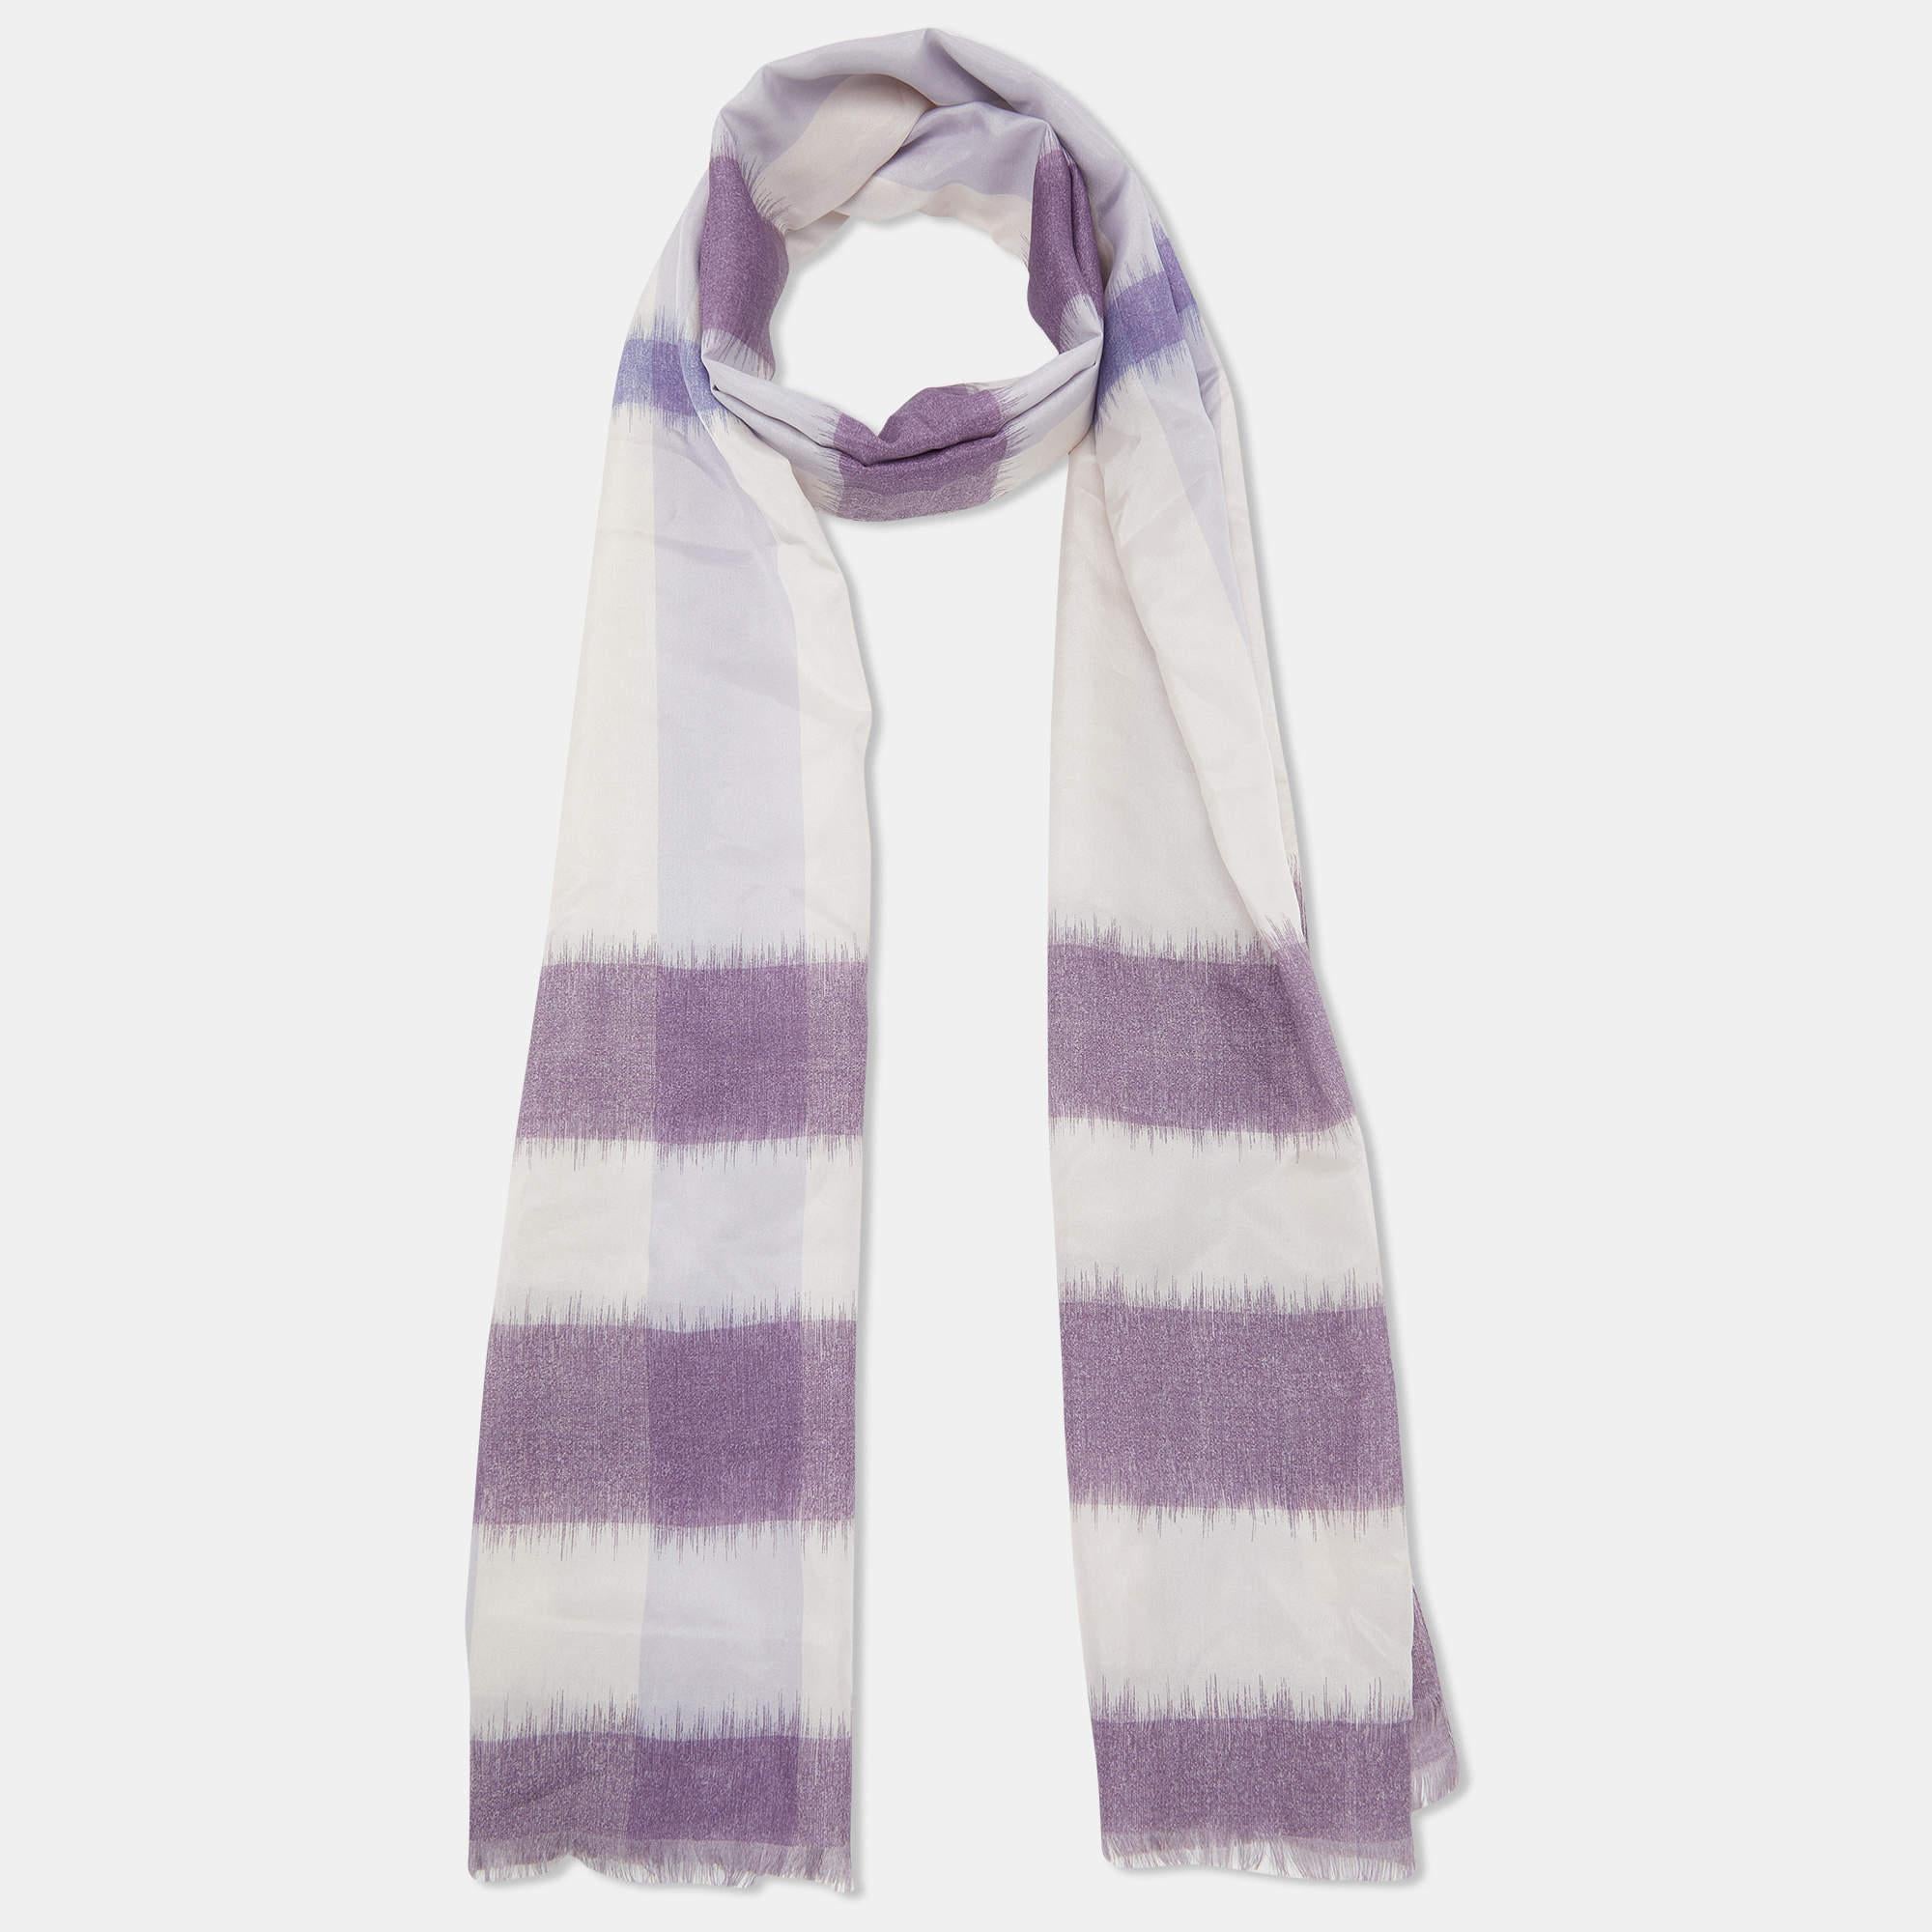 The Burberry scarf boasts a regal hue with an intricate equestrian motif. Crafted in luxurious silk, it features the iconic Horseferry print and elegant fringed edges.

